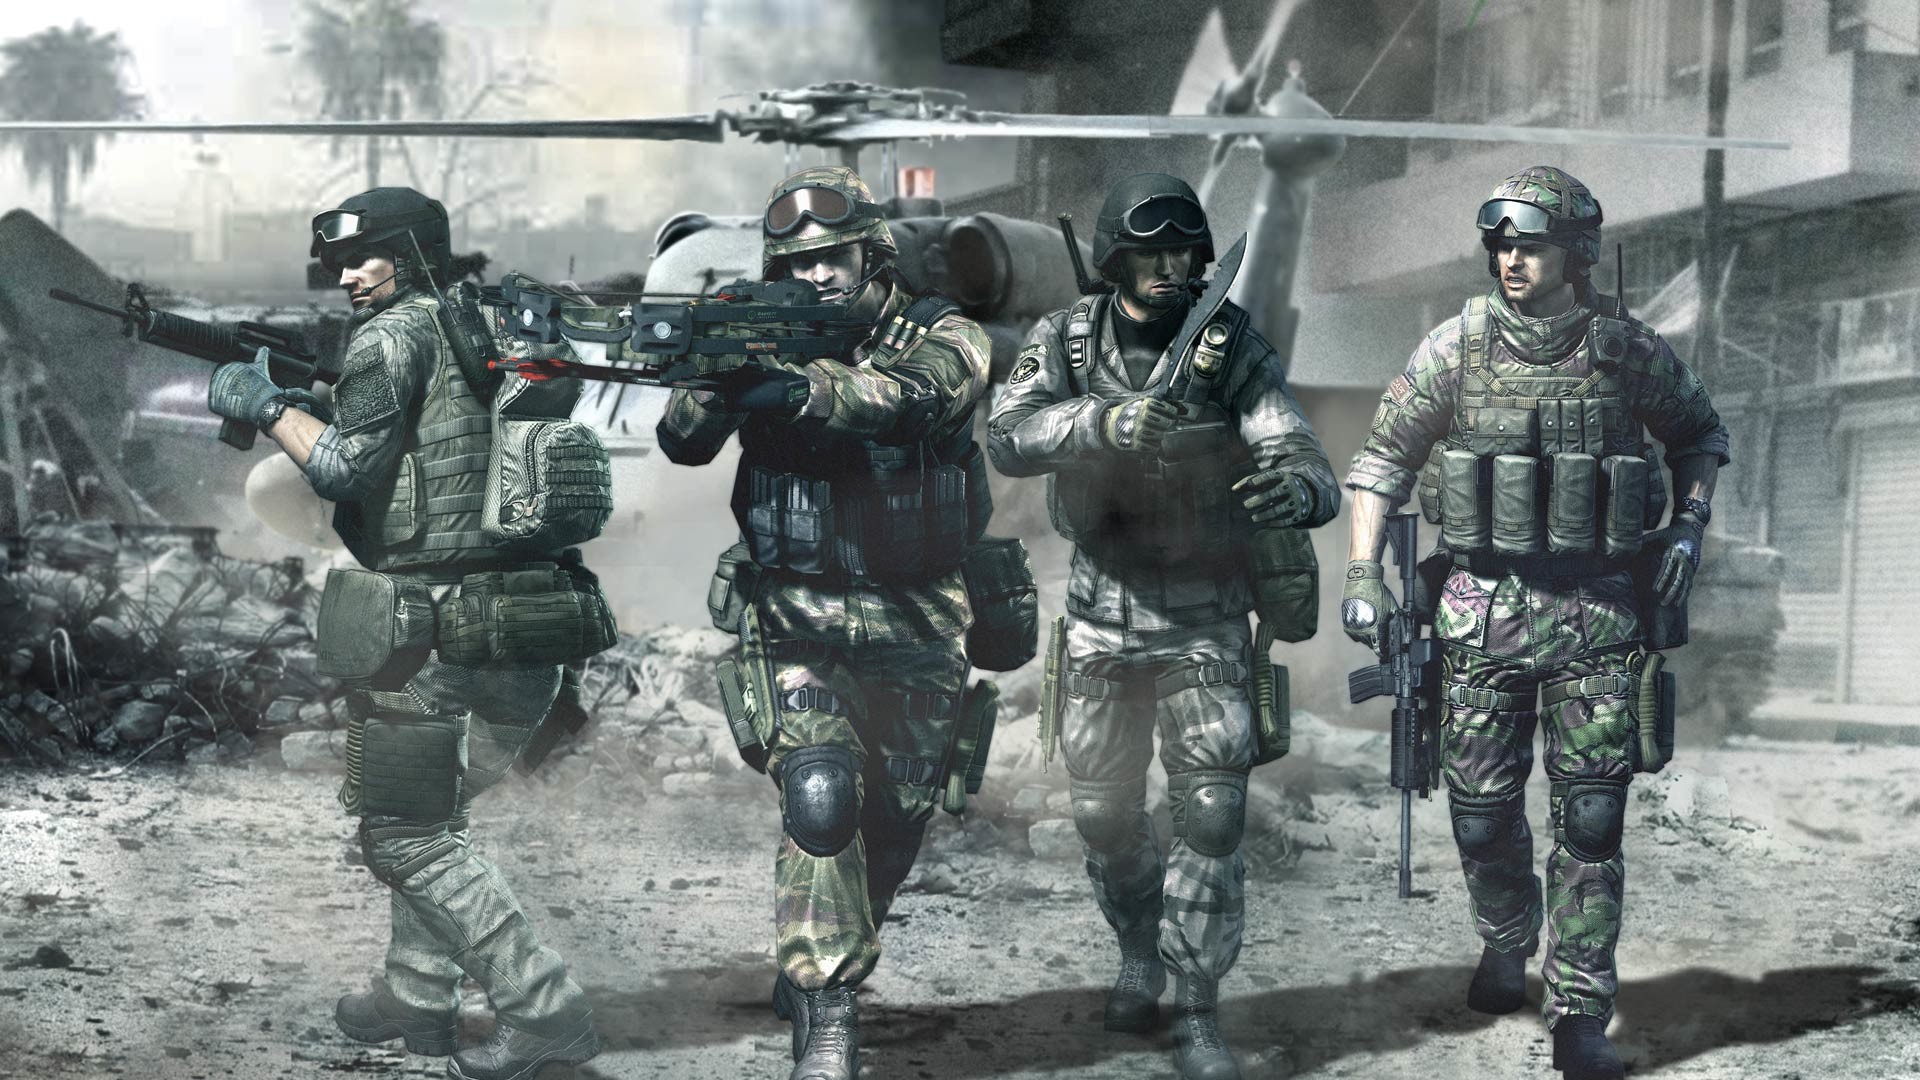 1920x1080 Delta Force Wallpapers | Top HDQ Delta Force Images, Wallpapers .